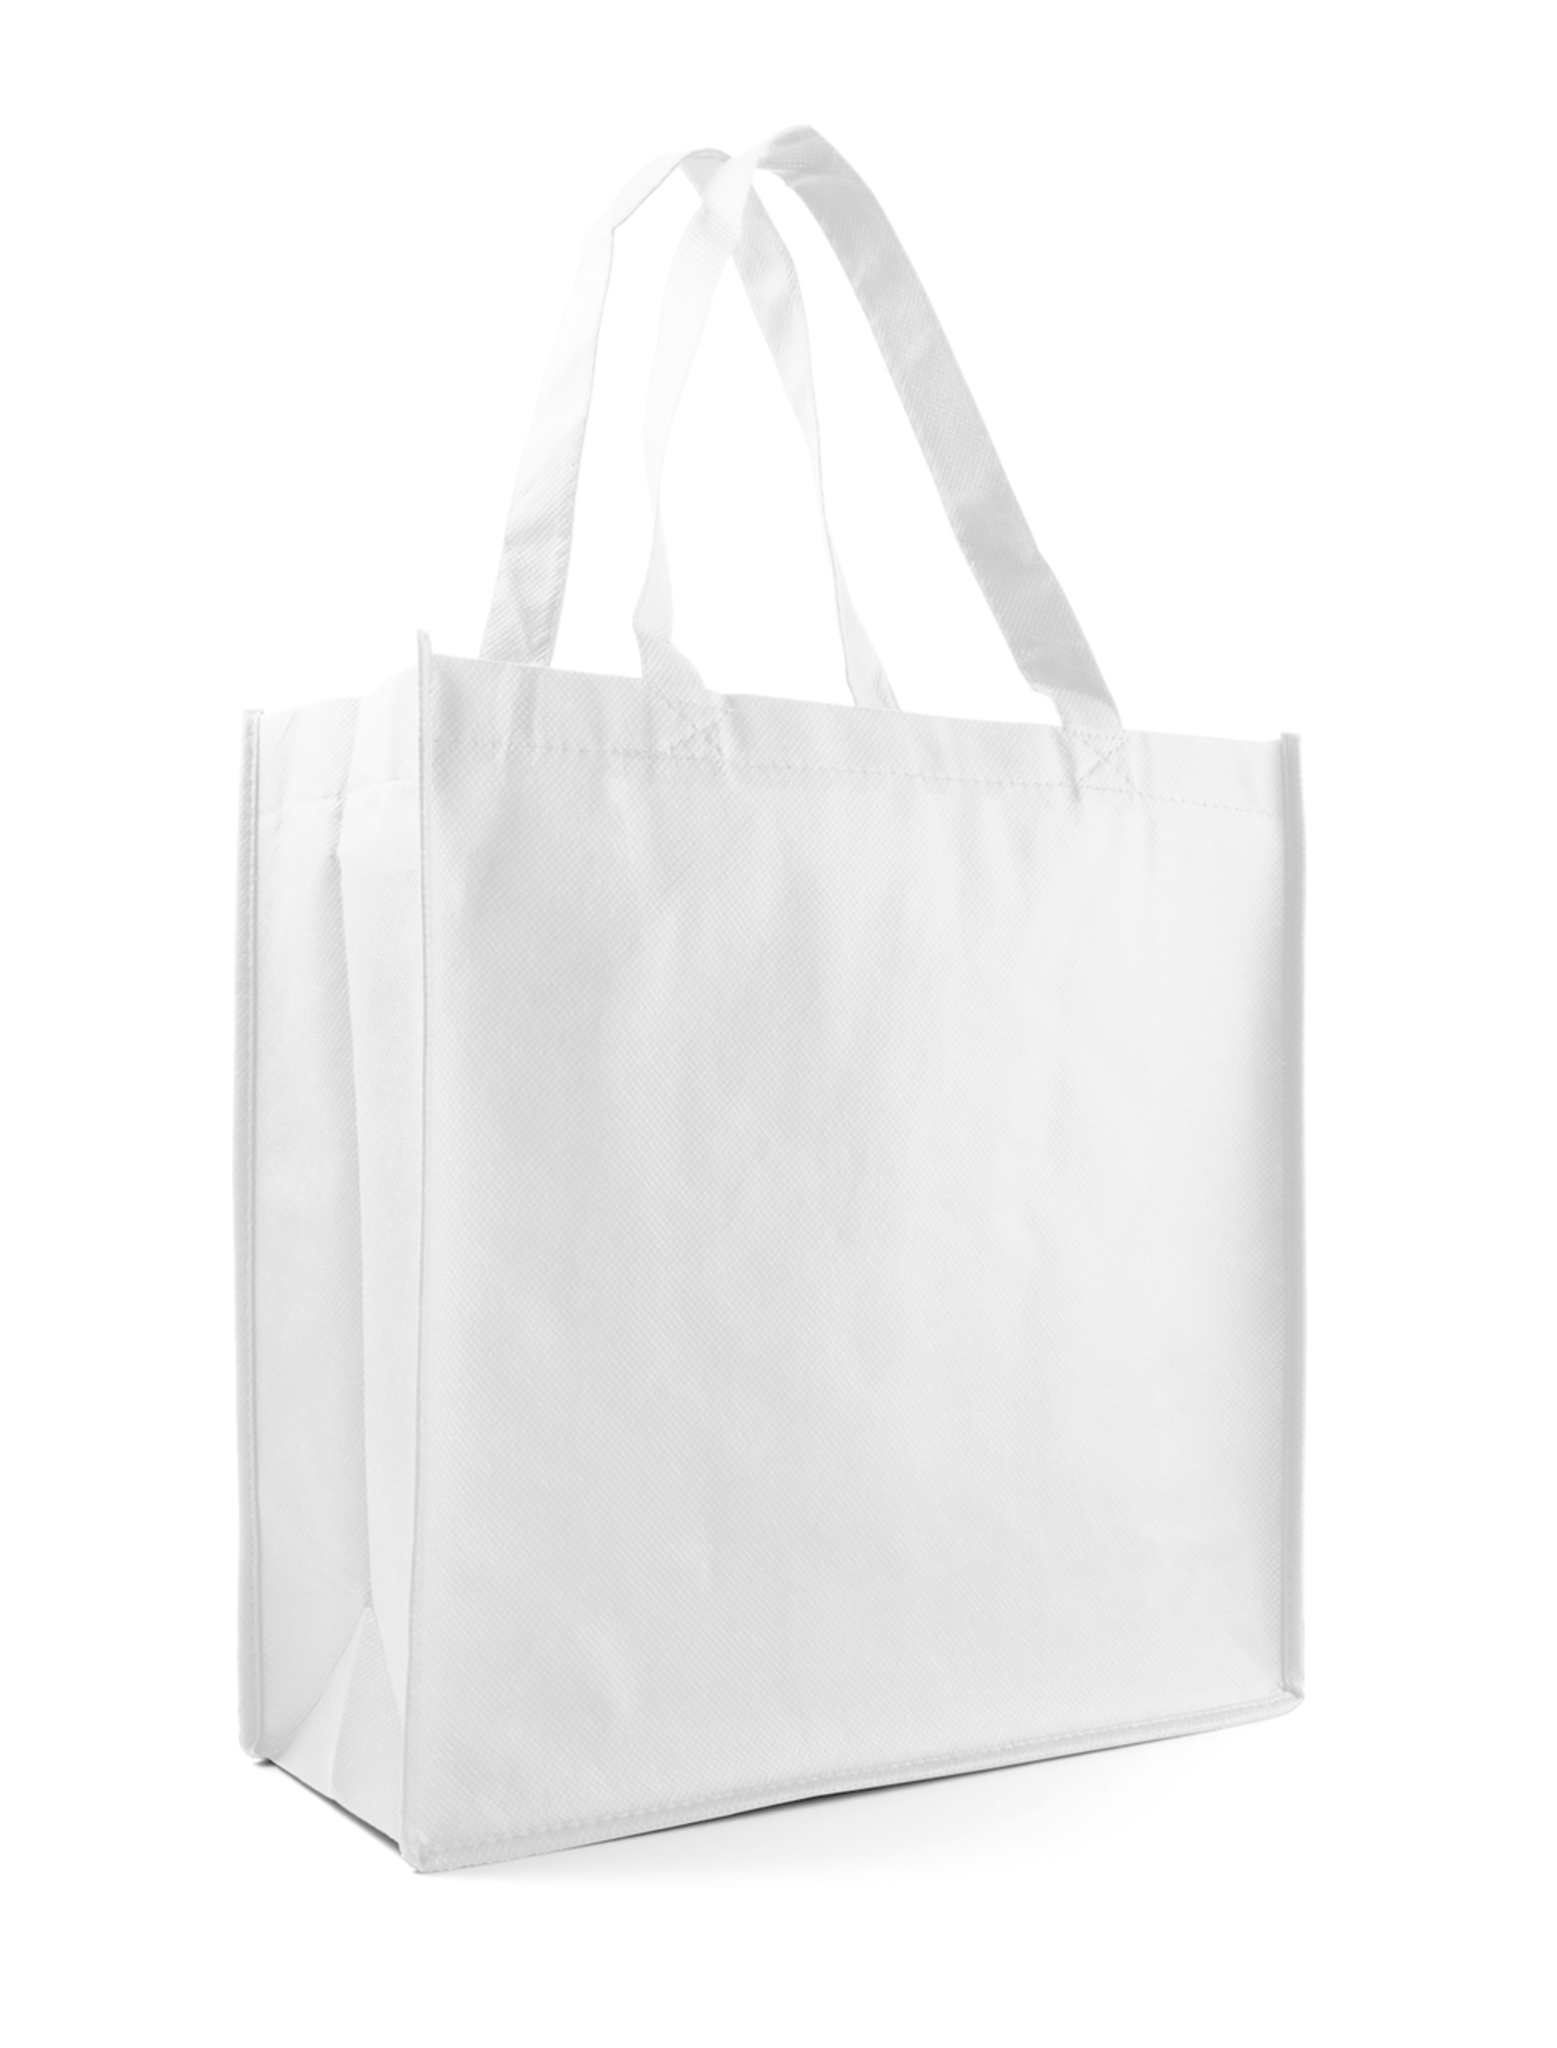 Greenmile 6 Pack White Canvas Tote Bags | Large Cotton Reusable Shopping Bags | Hold 35 lbs | Heavy Duty, Washable, Eco Friendly Biodegradable